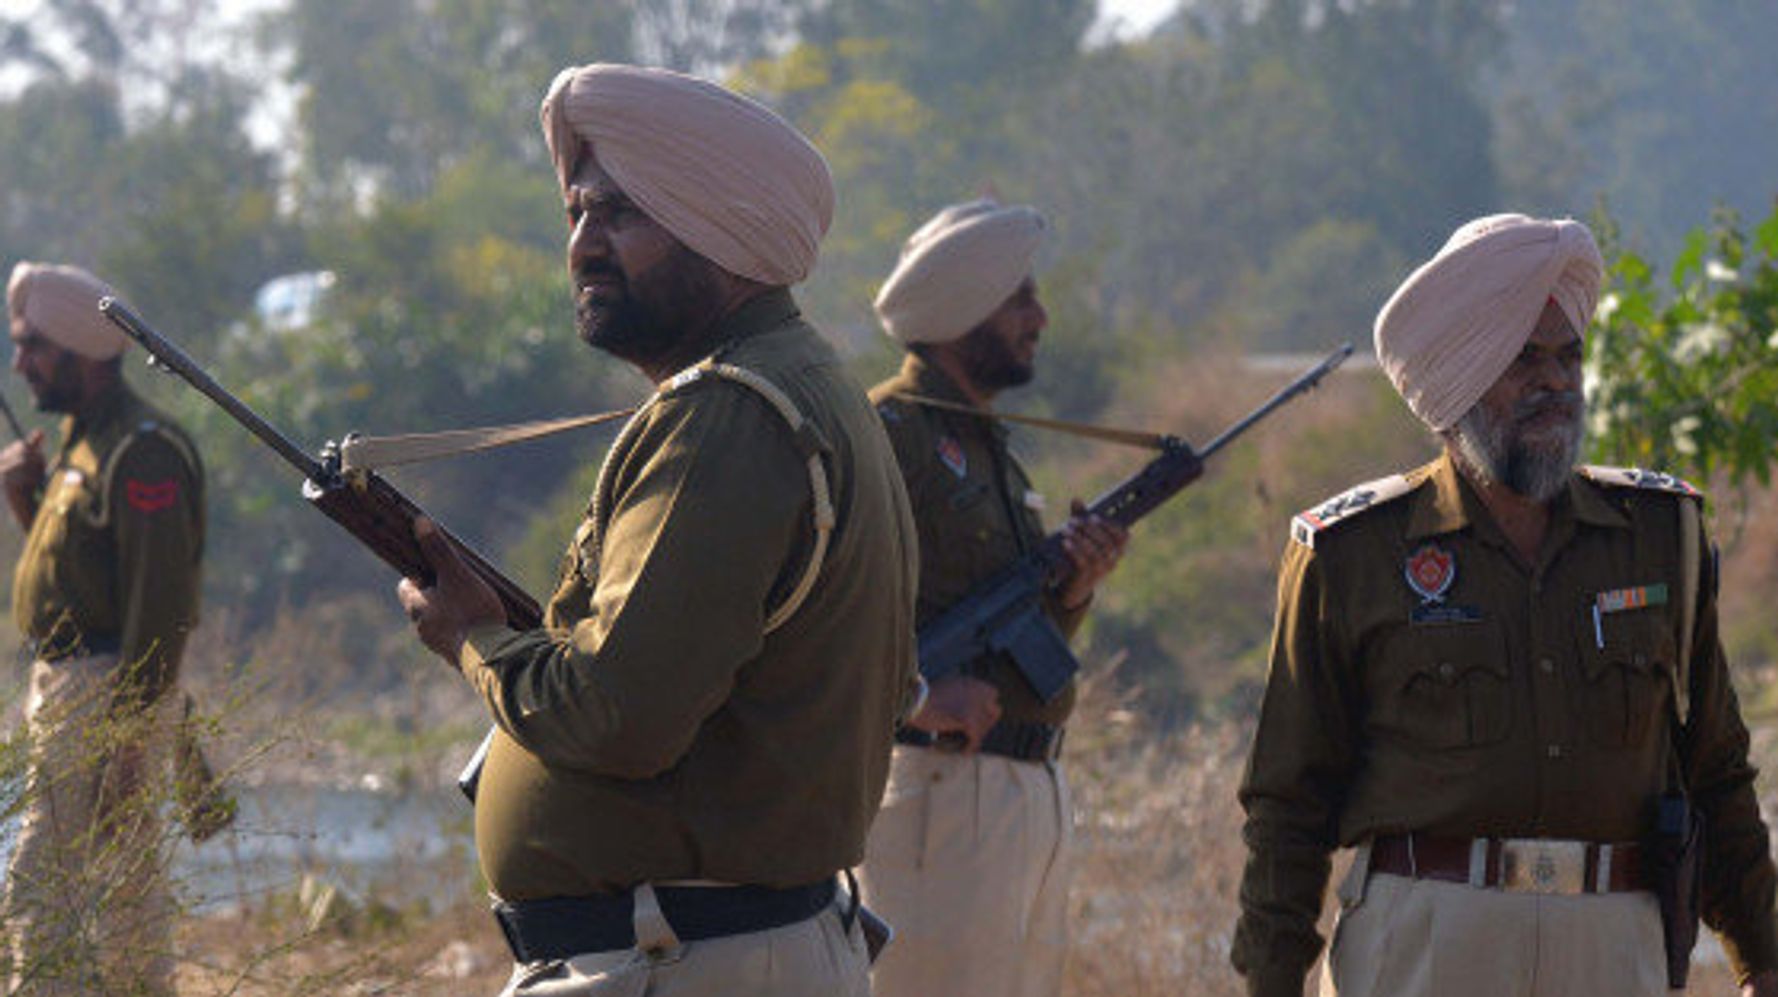 Pathankot Attack: The Mystery Of The Punjab Police Officer Who Was Abducted, Then Let Off By Militants | HuffPost null